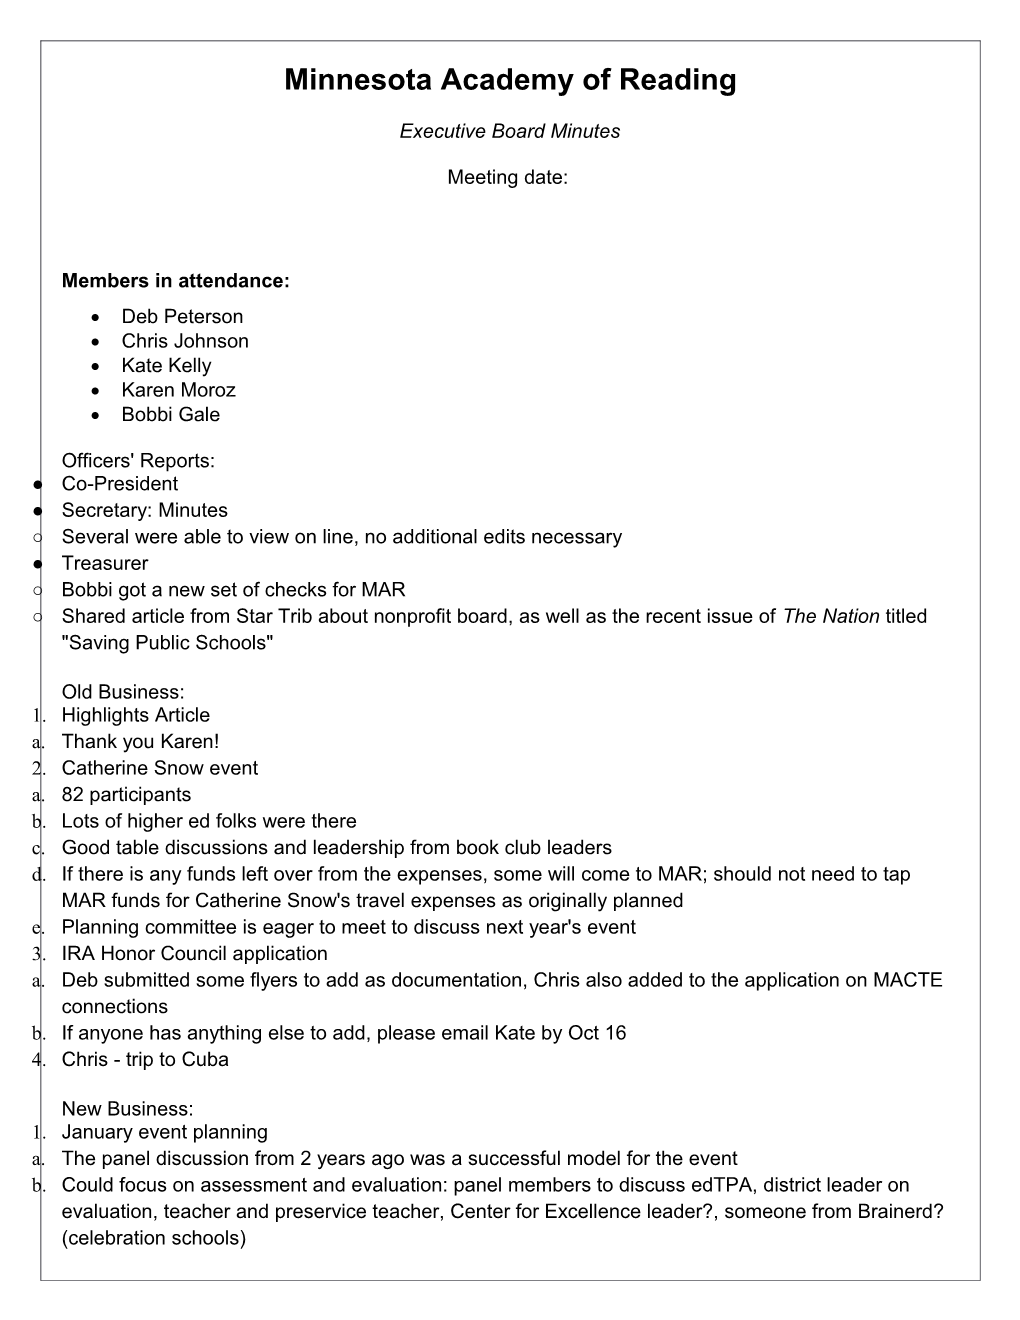 Sample Meeting Minutes Template s1